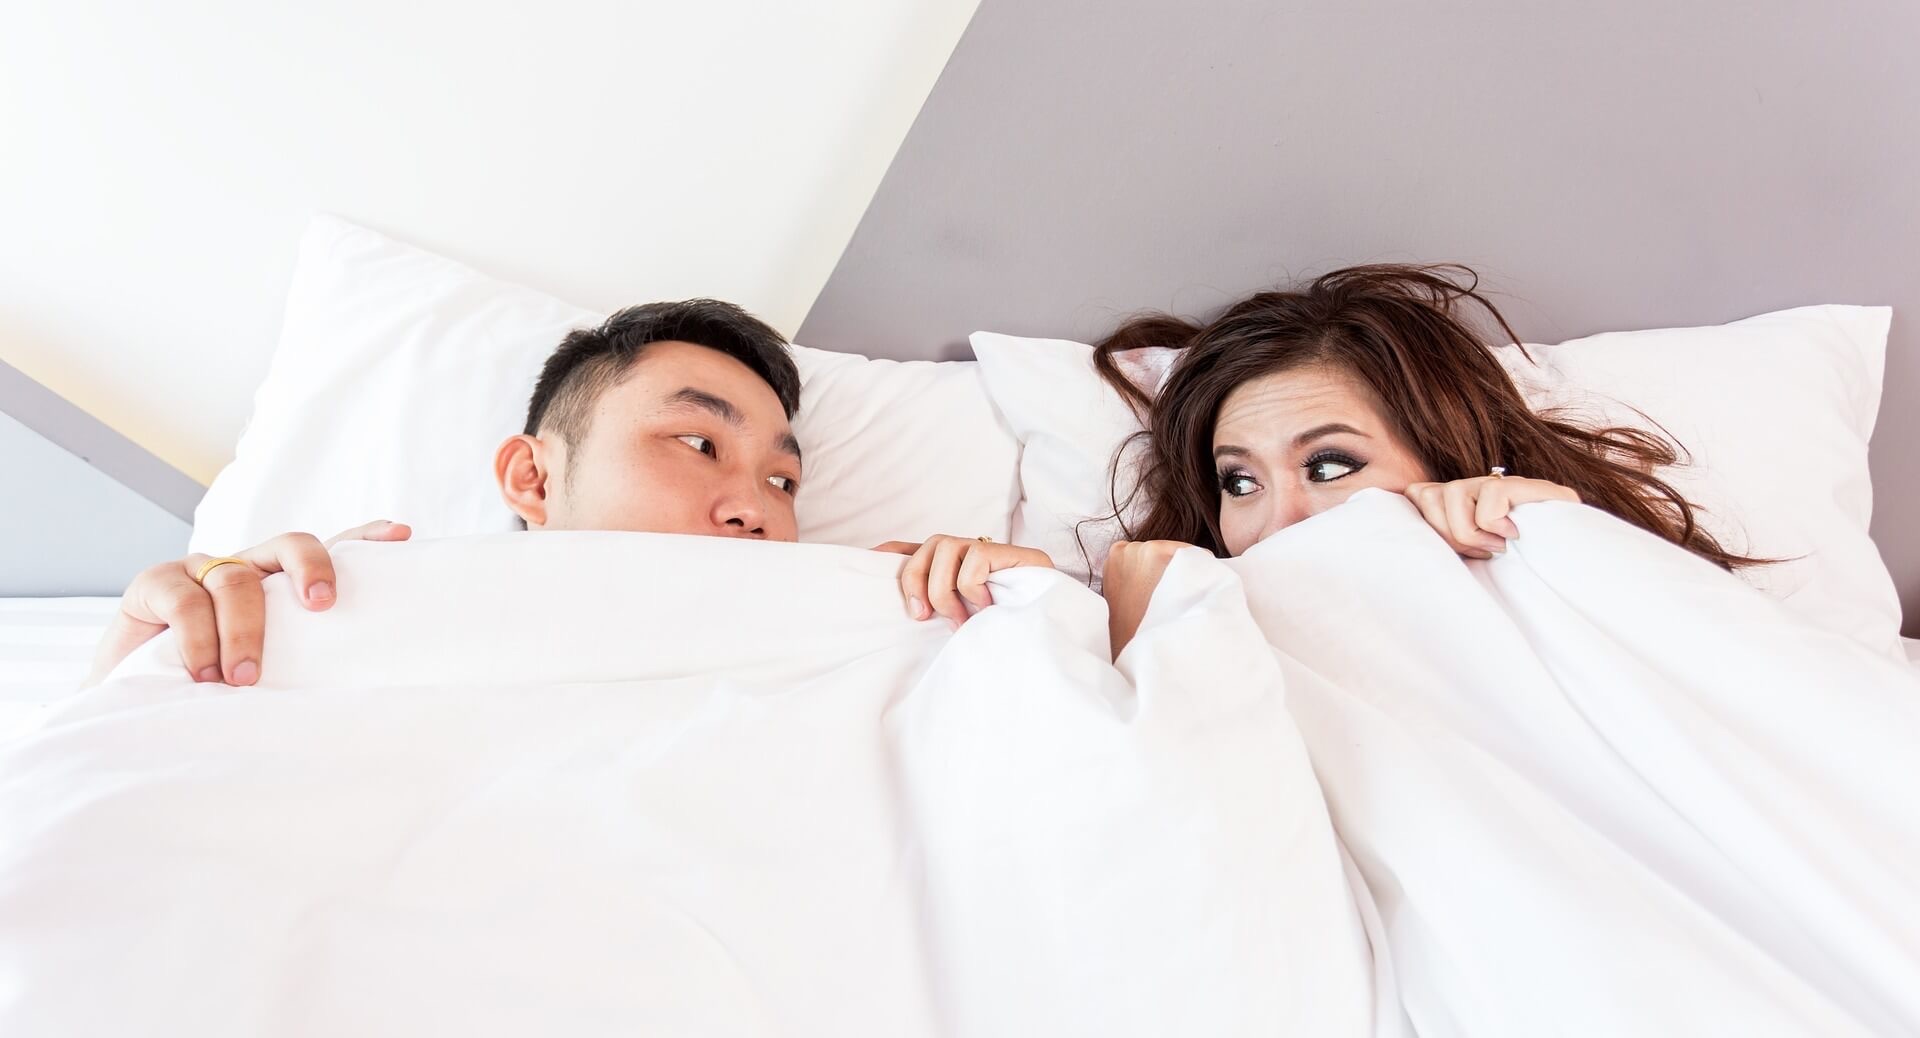 Couple whose heads are sticking up out of bed covers look at each other.